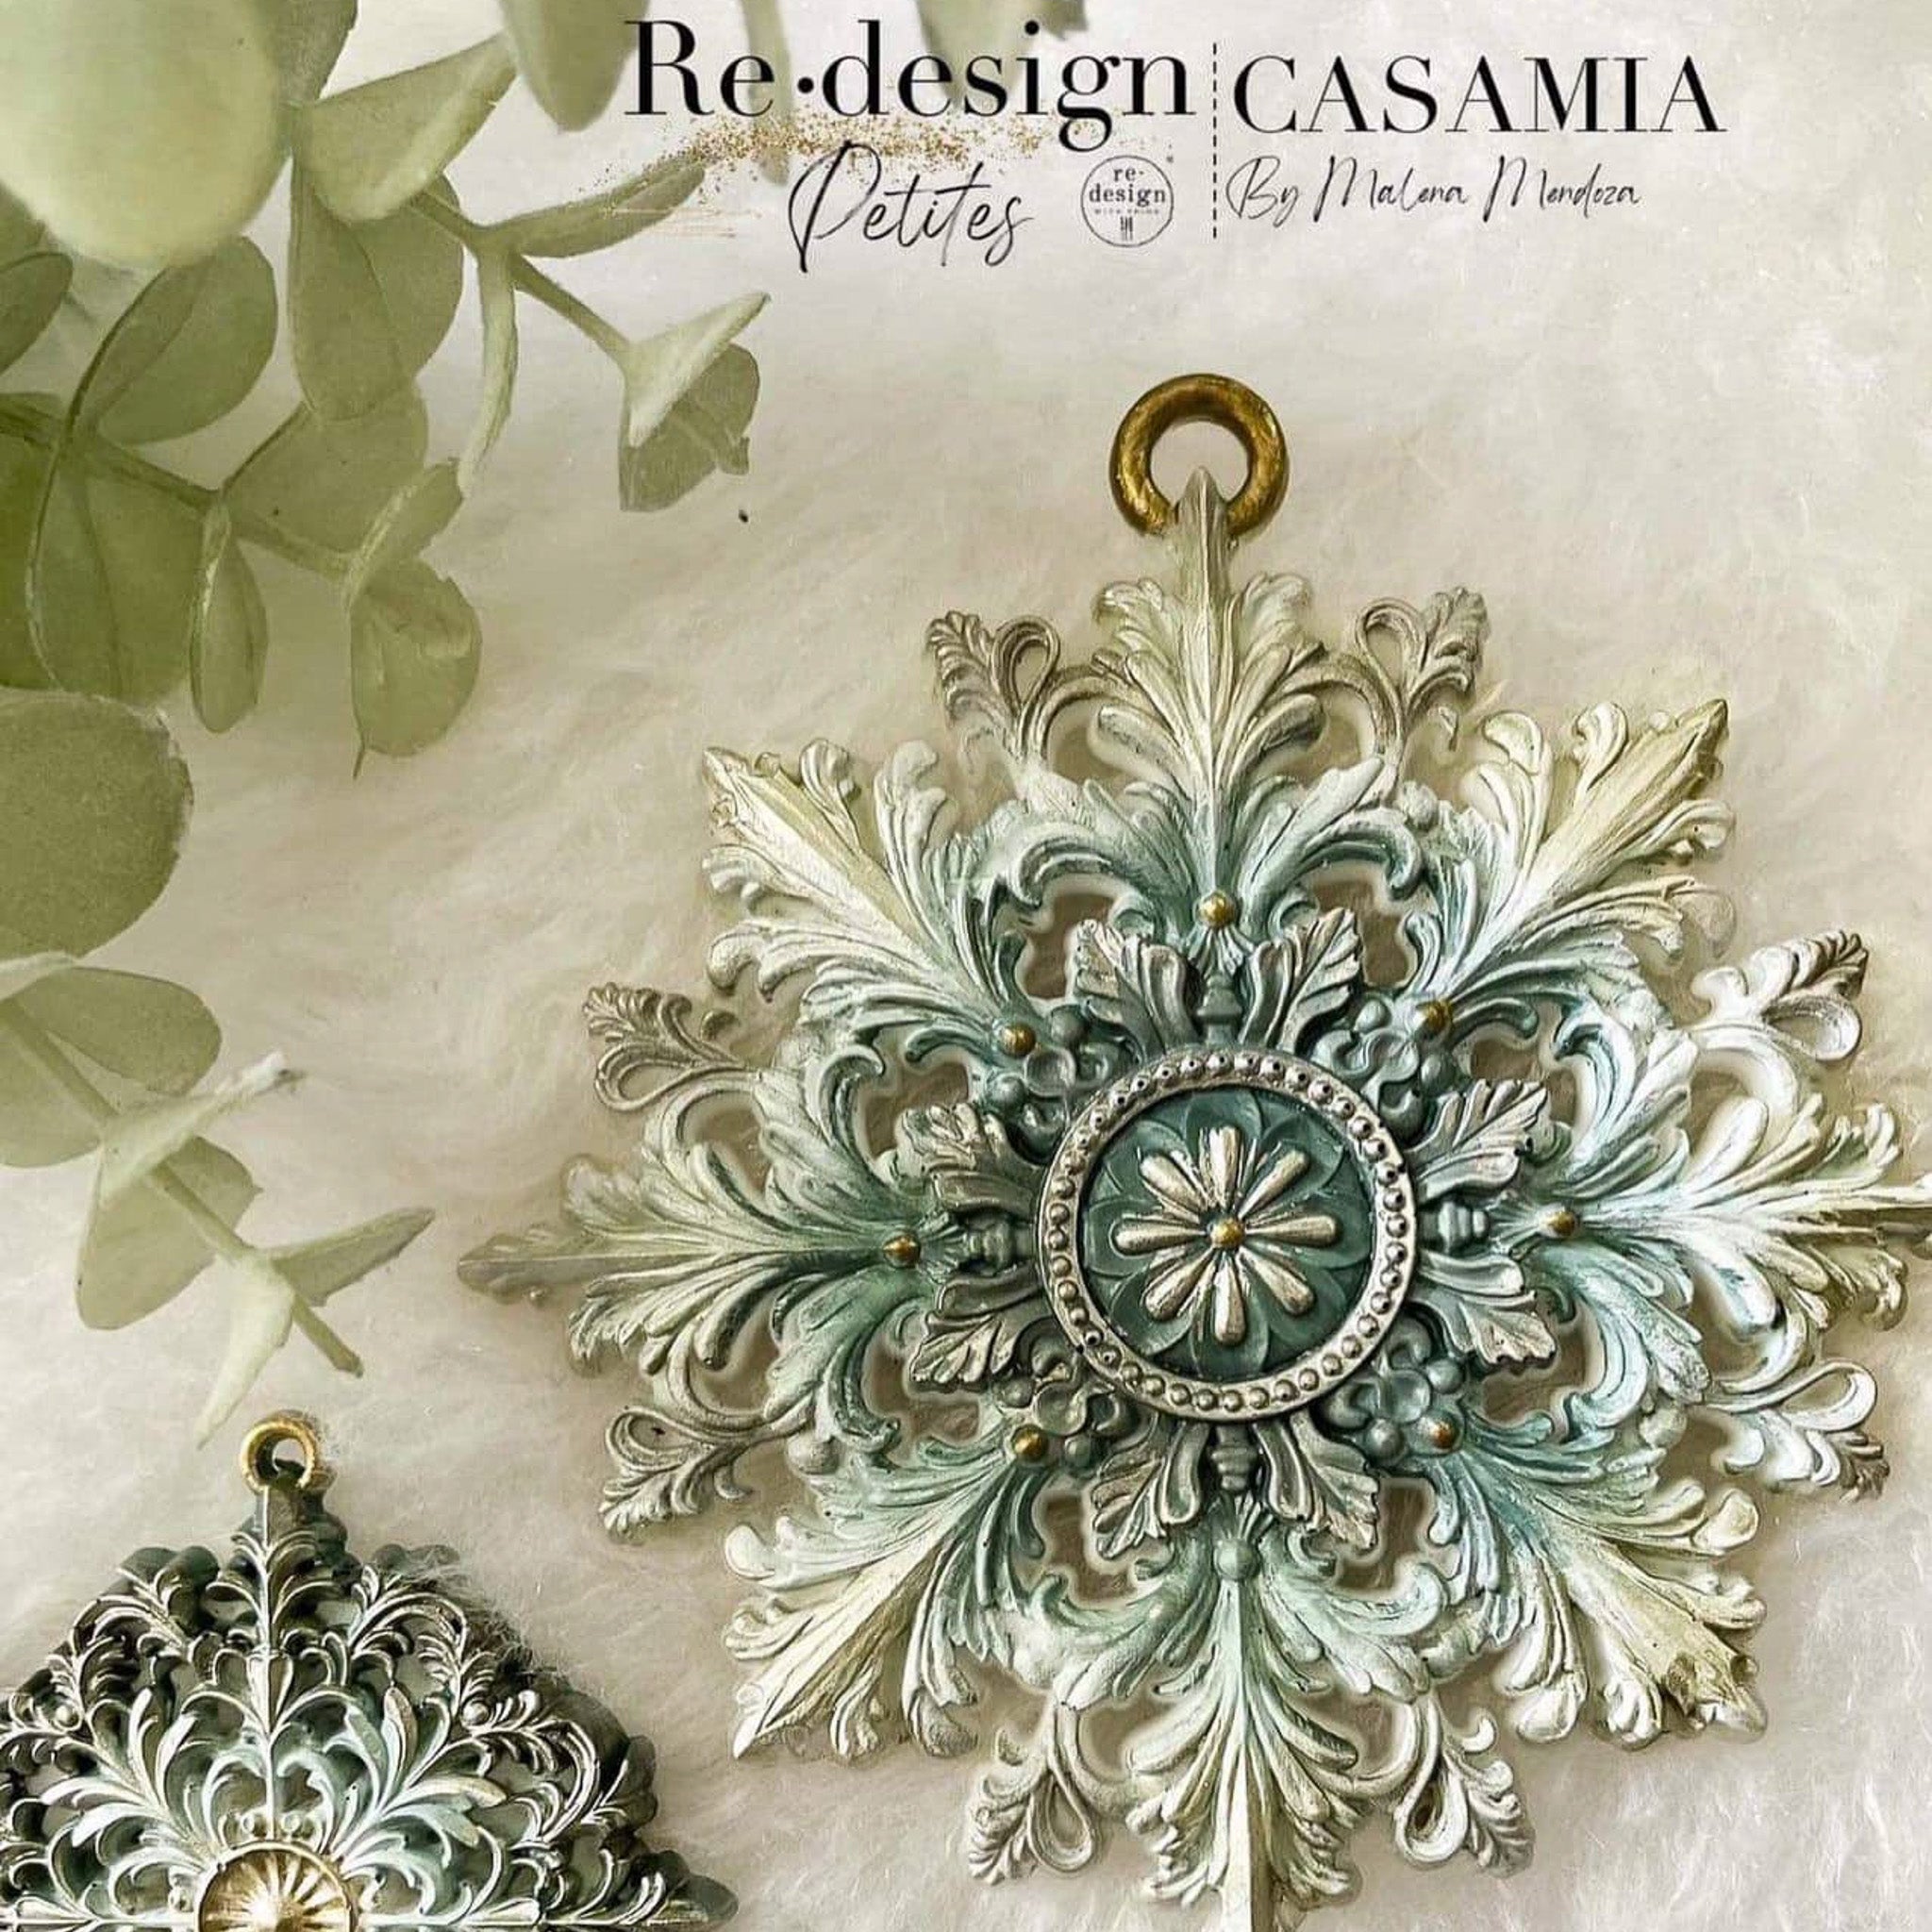 Dark green, white, and gold painted castings created by Casamia by Malena Mendoza of ReDesign with Prima's Frost Spark silicone mould are set against a beige background with green foliage in the top left corner.